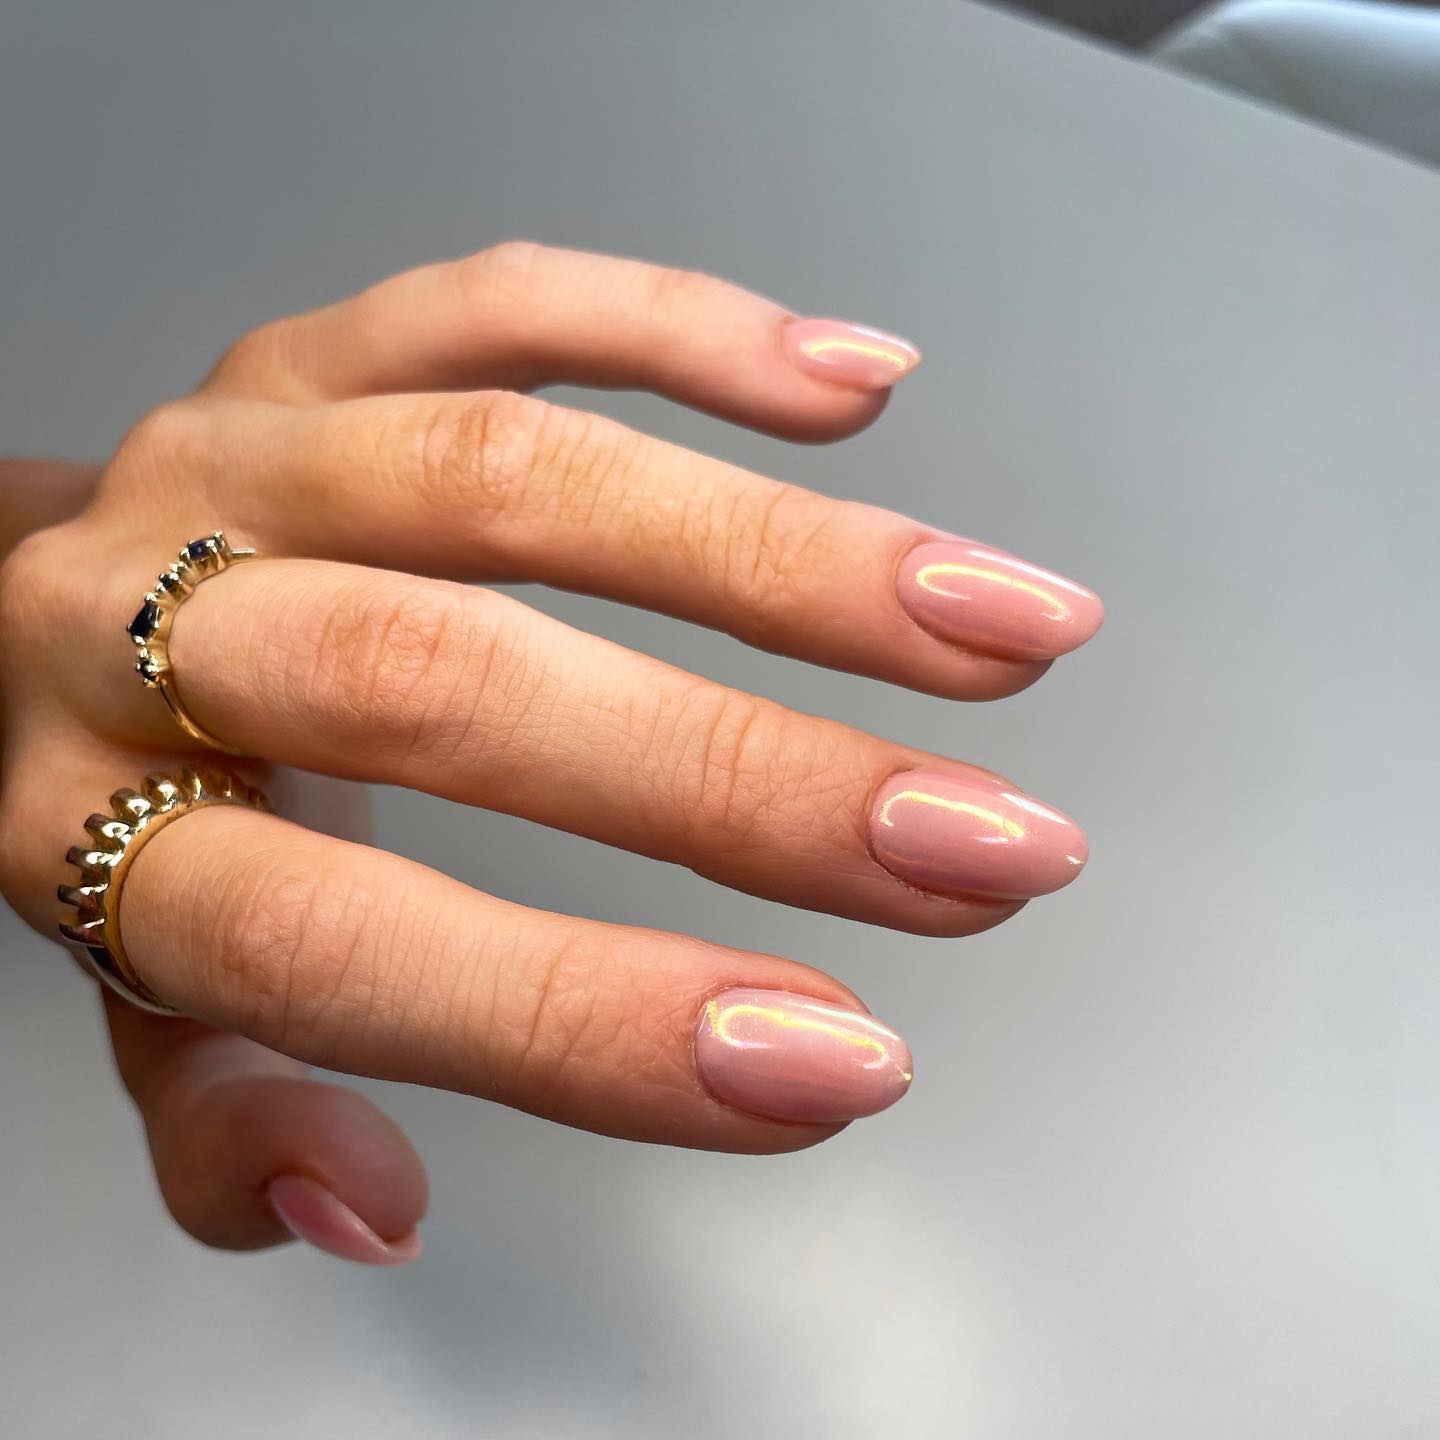 Beyond Plain & Simple: The Lady Nails Trend as a Rich Girl Manicure Makeover